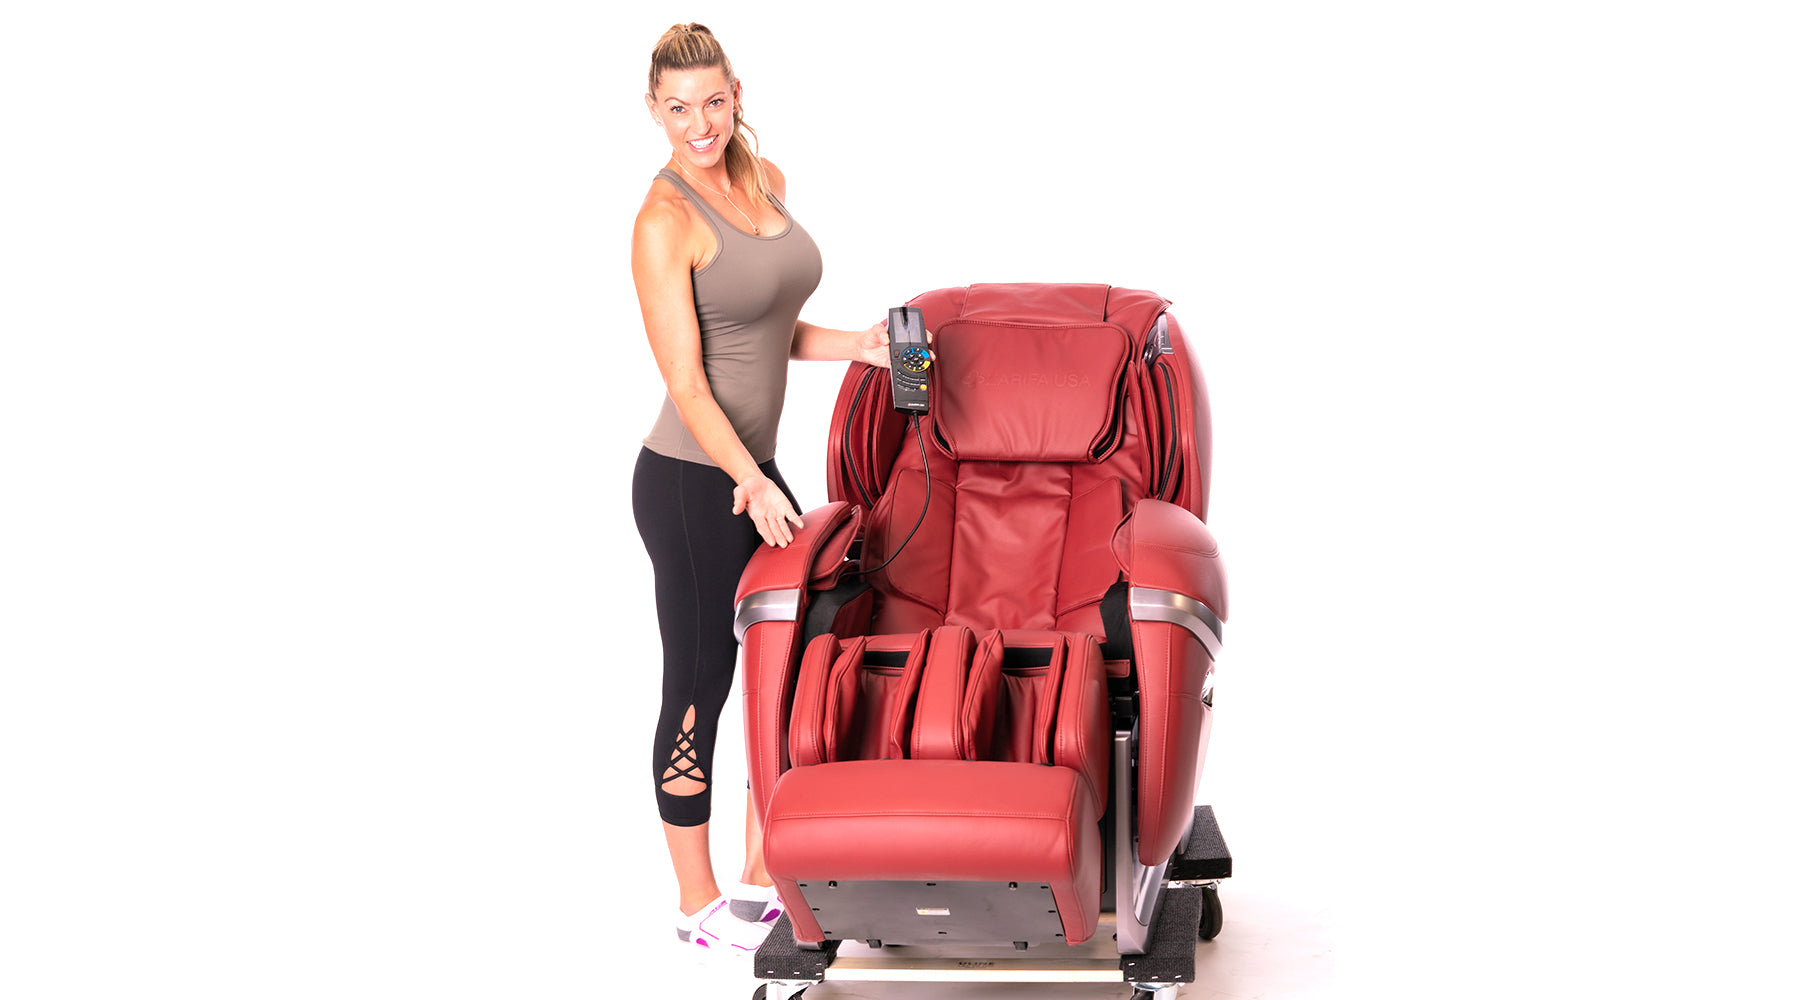 Can a Massage Chair Help You Lose Weight?